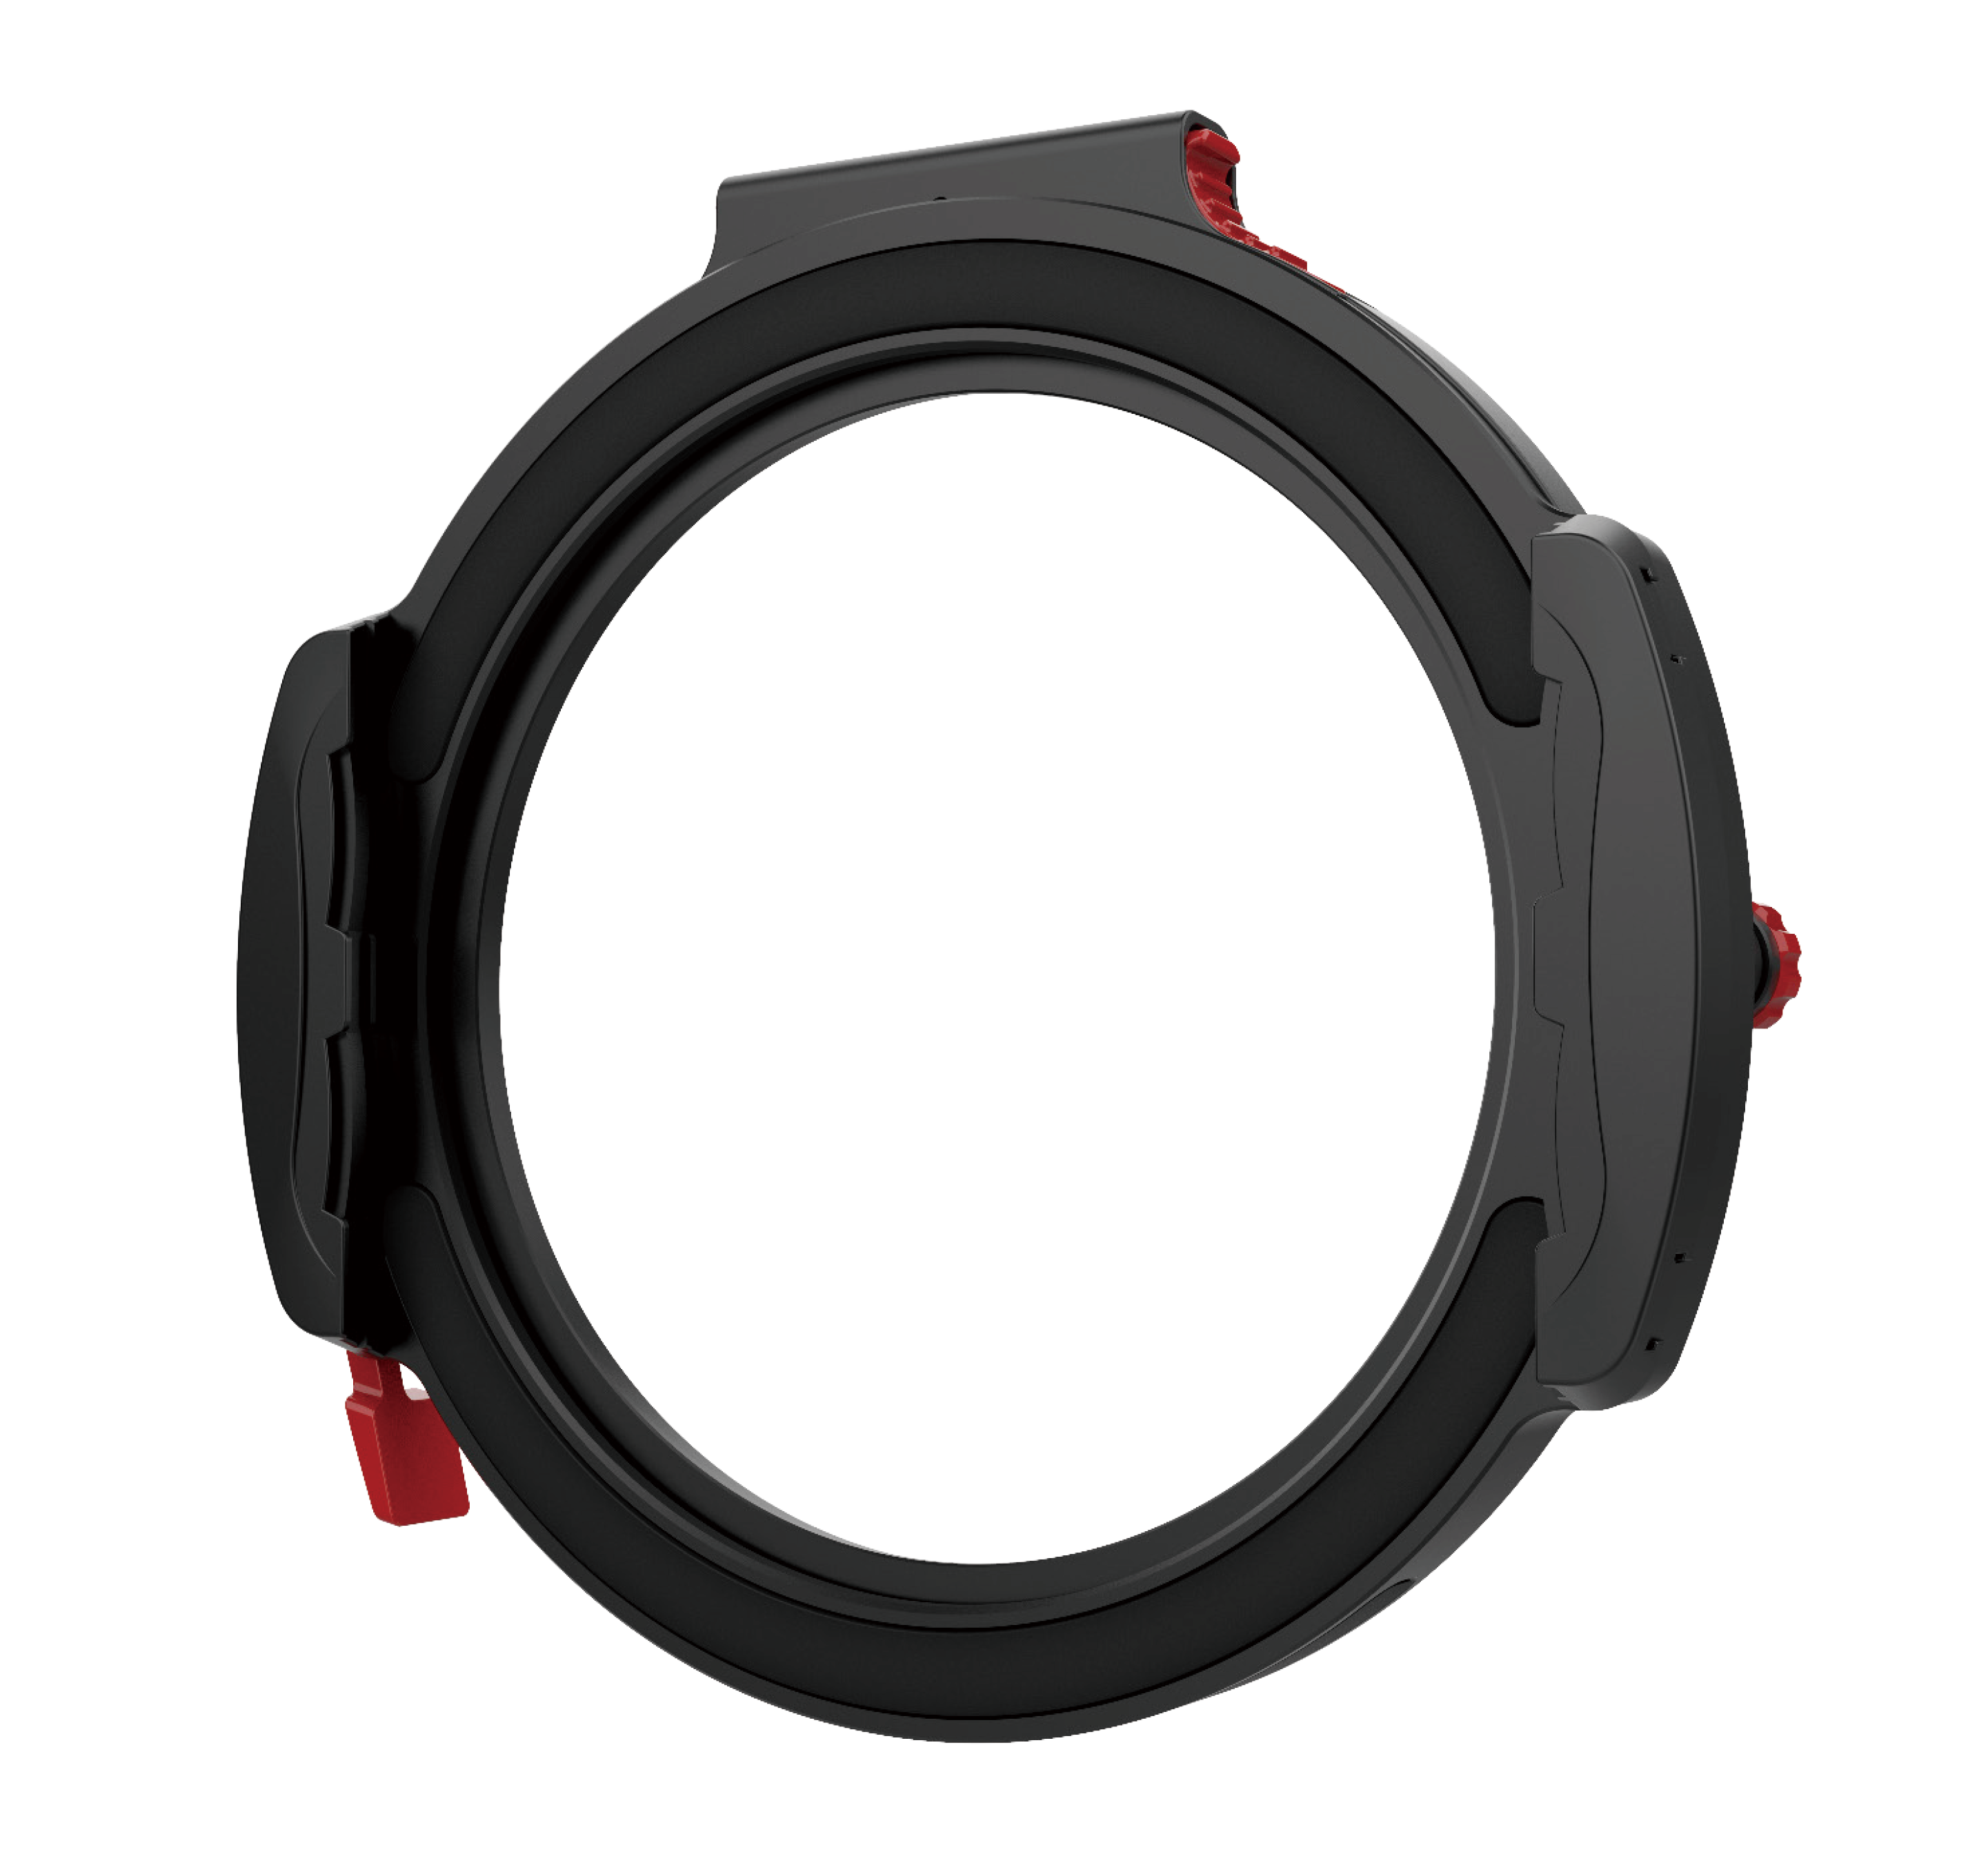 Haida M10 -II Filter Holder Kit for 100mm Series Filters With 82mm Adapter Ring